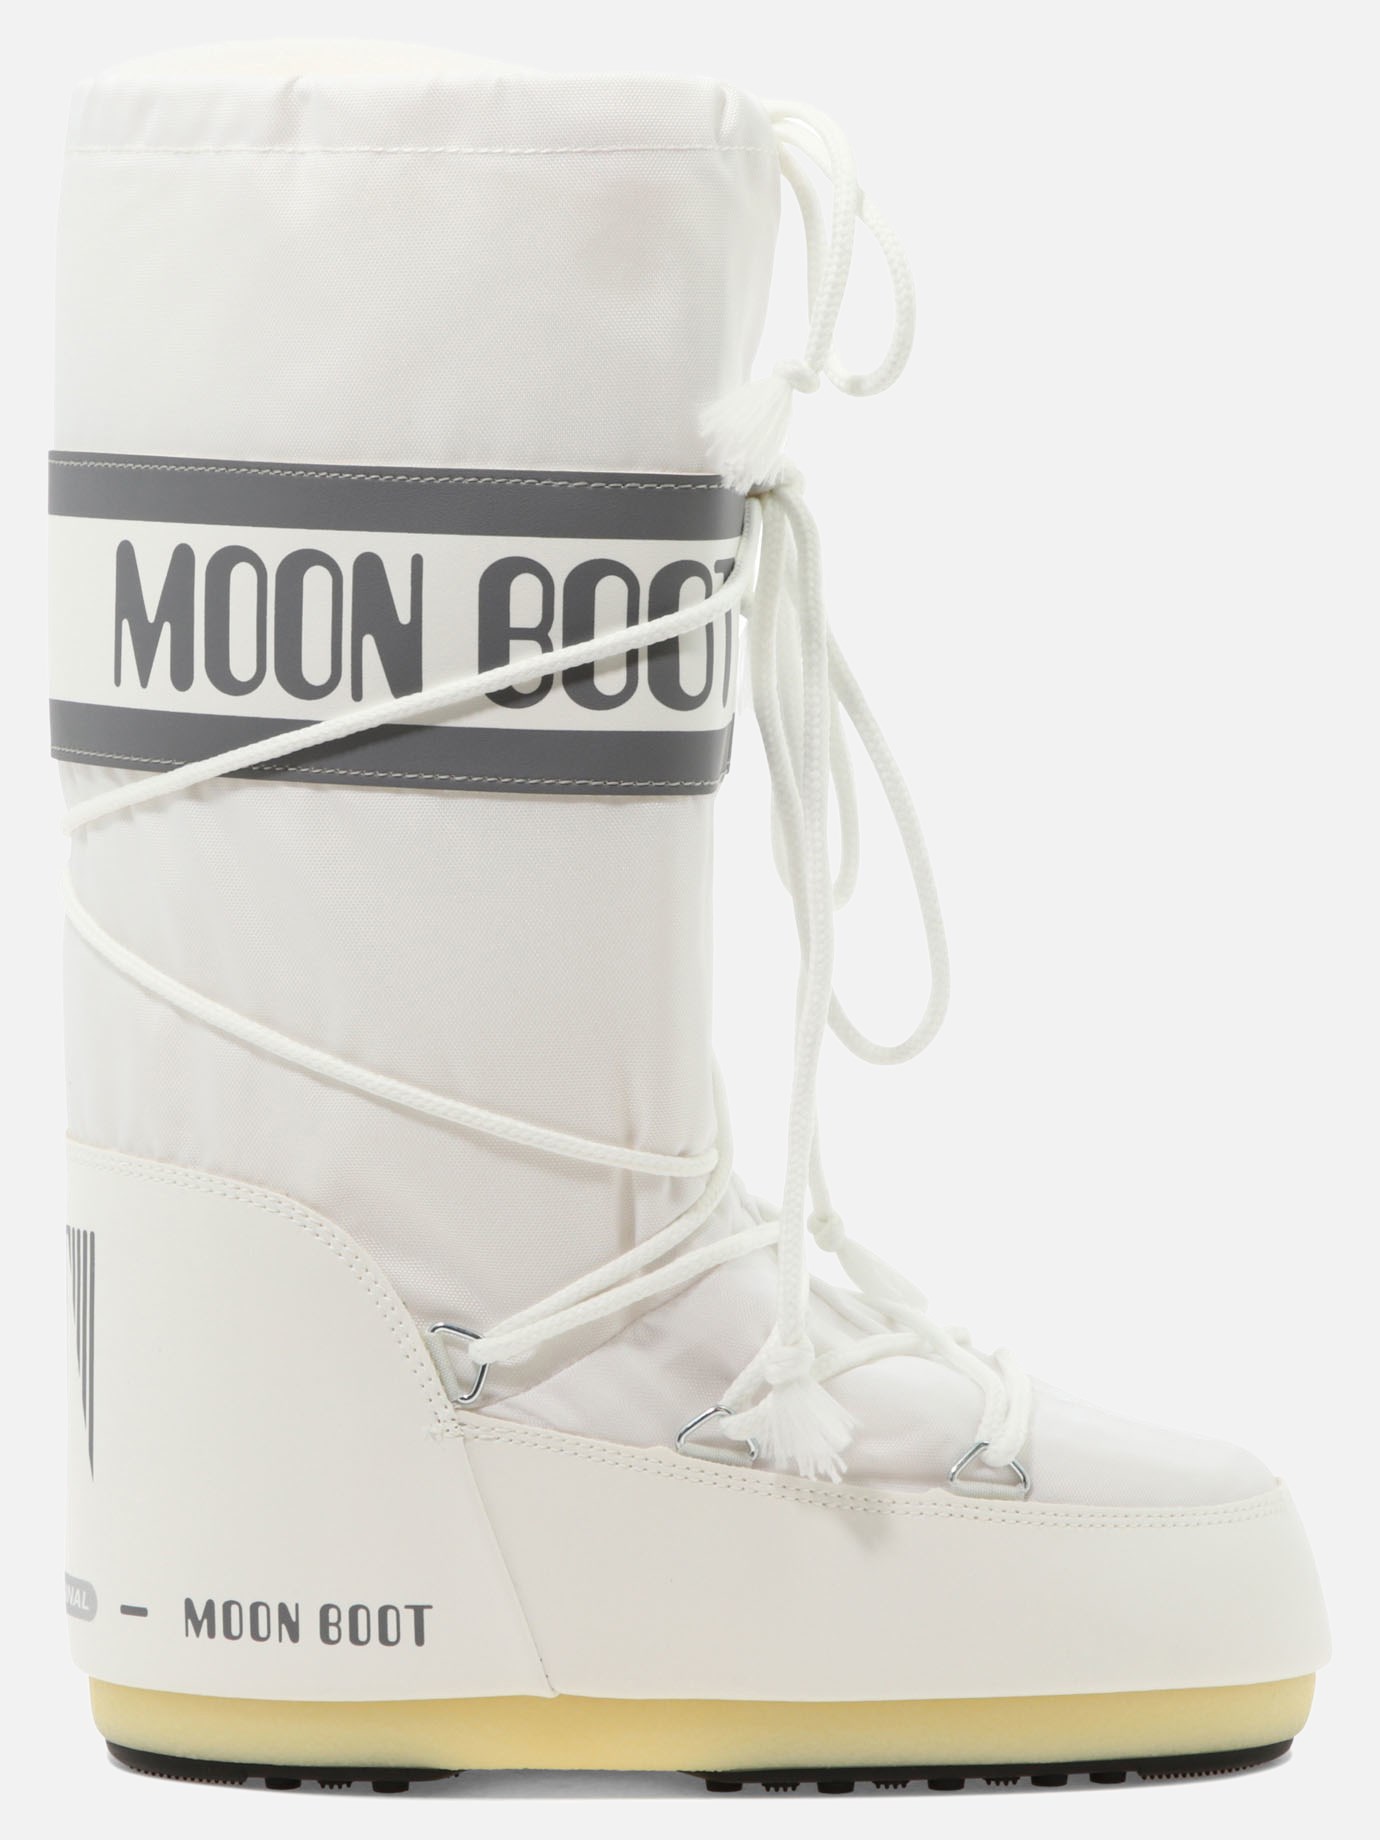  Nylon  after-ski bootsby Moon Boot - 3